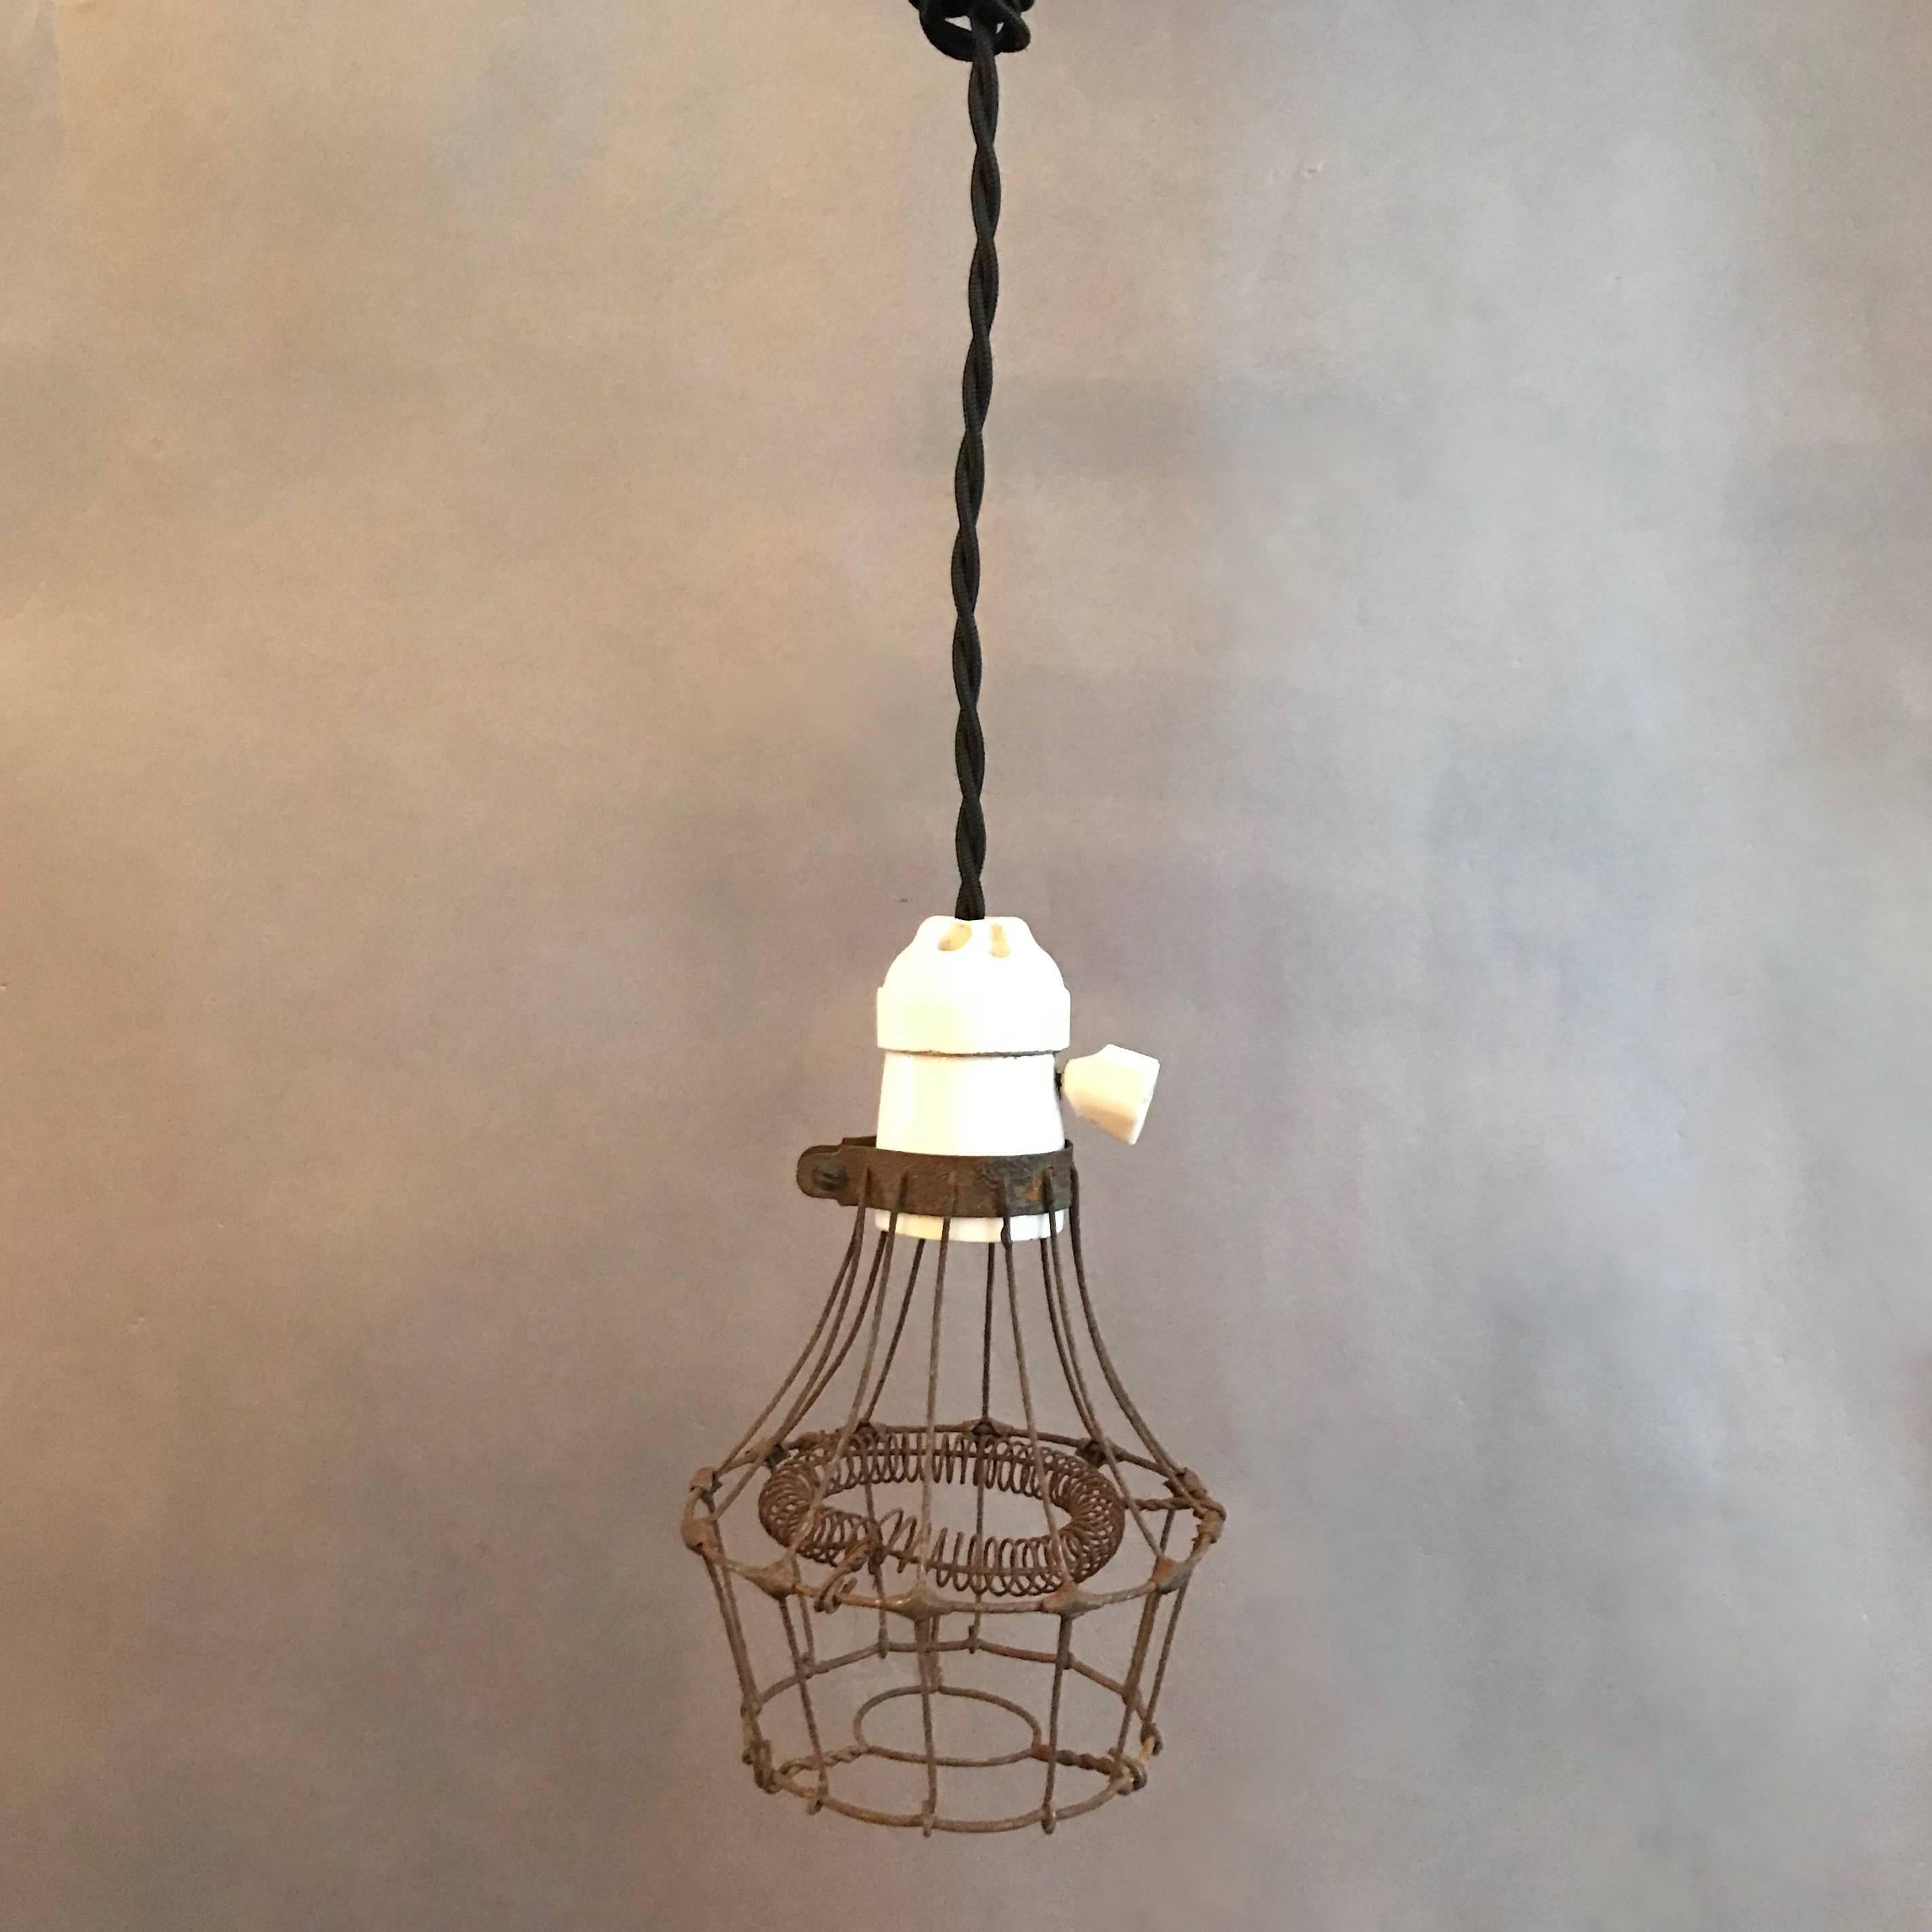 Unusual and rare, 1920s, Industrial, utility, cage pendant light features a steel wire cage with interior coiled bulb protection and porcelain fitter with switch. The light is newly wired to accept up to a 200 watt bulb with 48in. of braided cloth